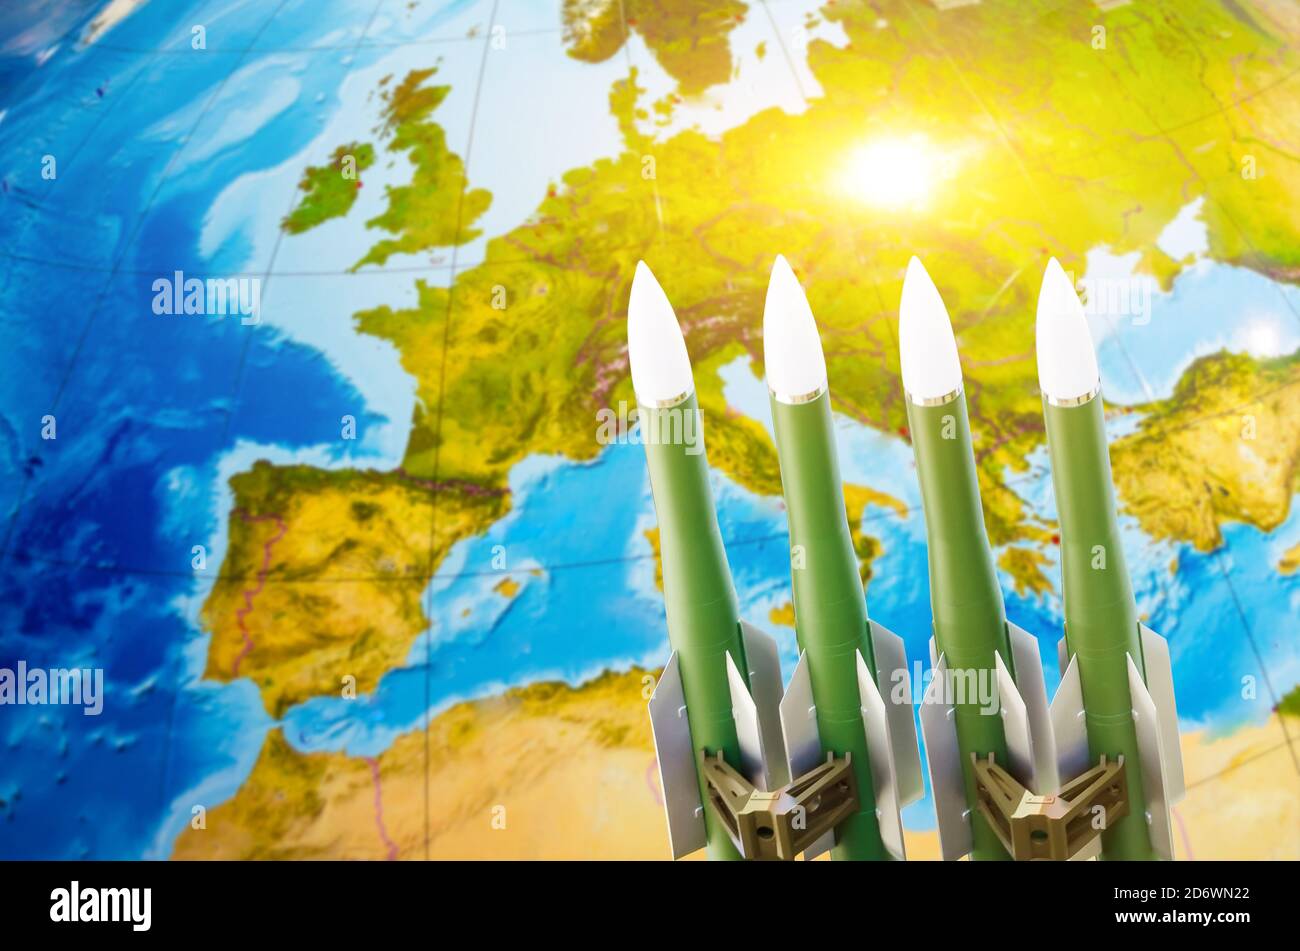 Race of weapons, nuclear weapons, the threat of war in the world. Missiles against the background of Europe Stock Photo